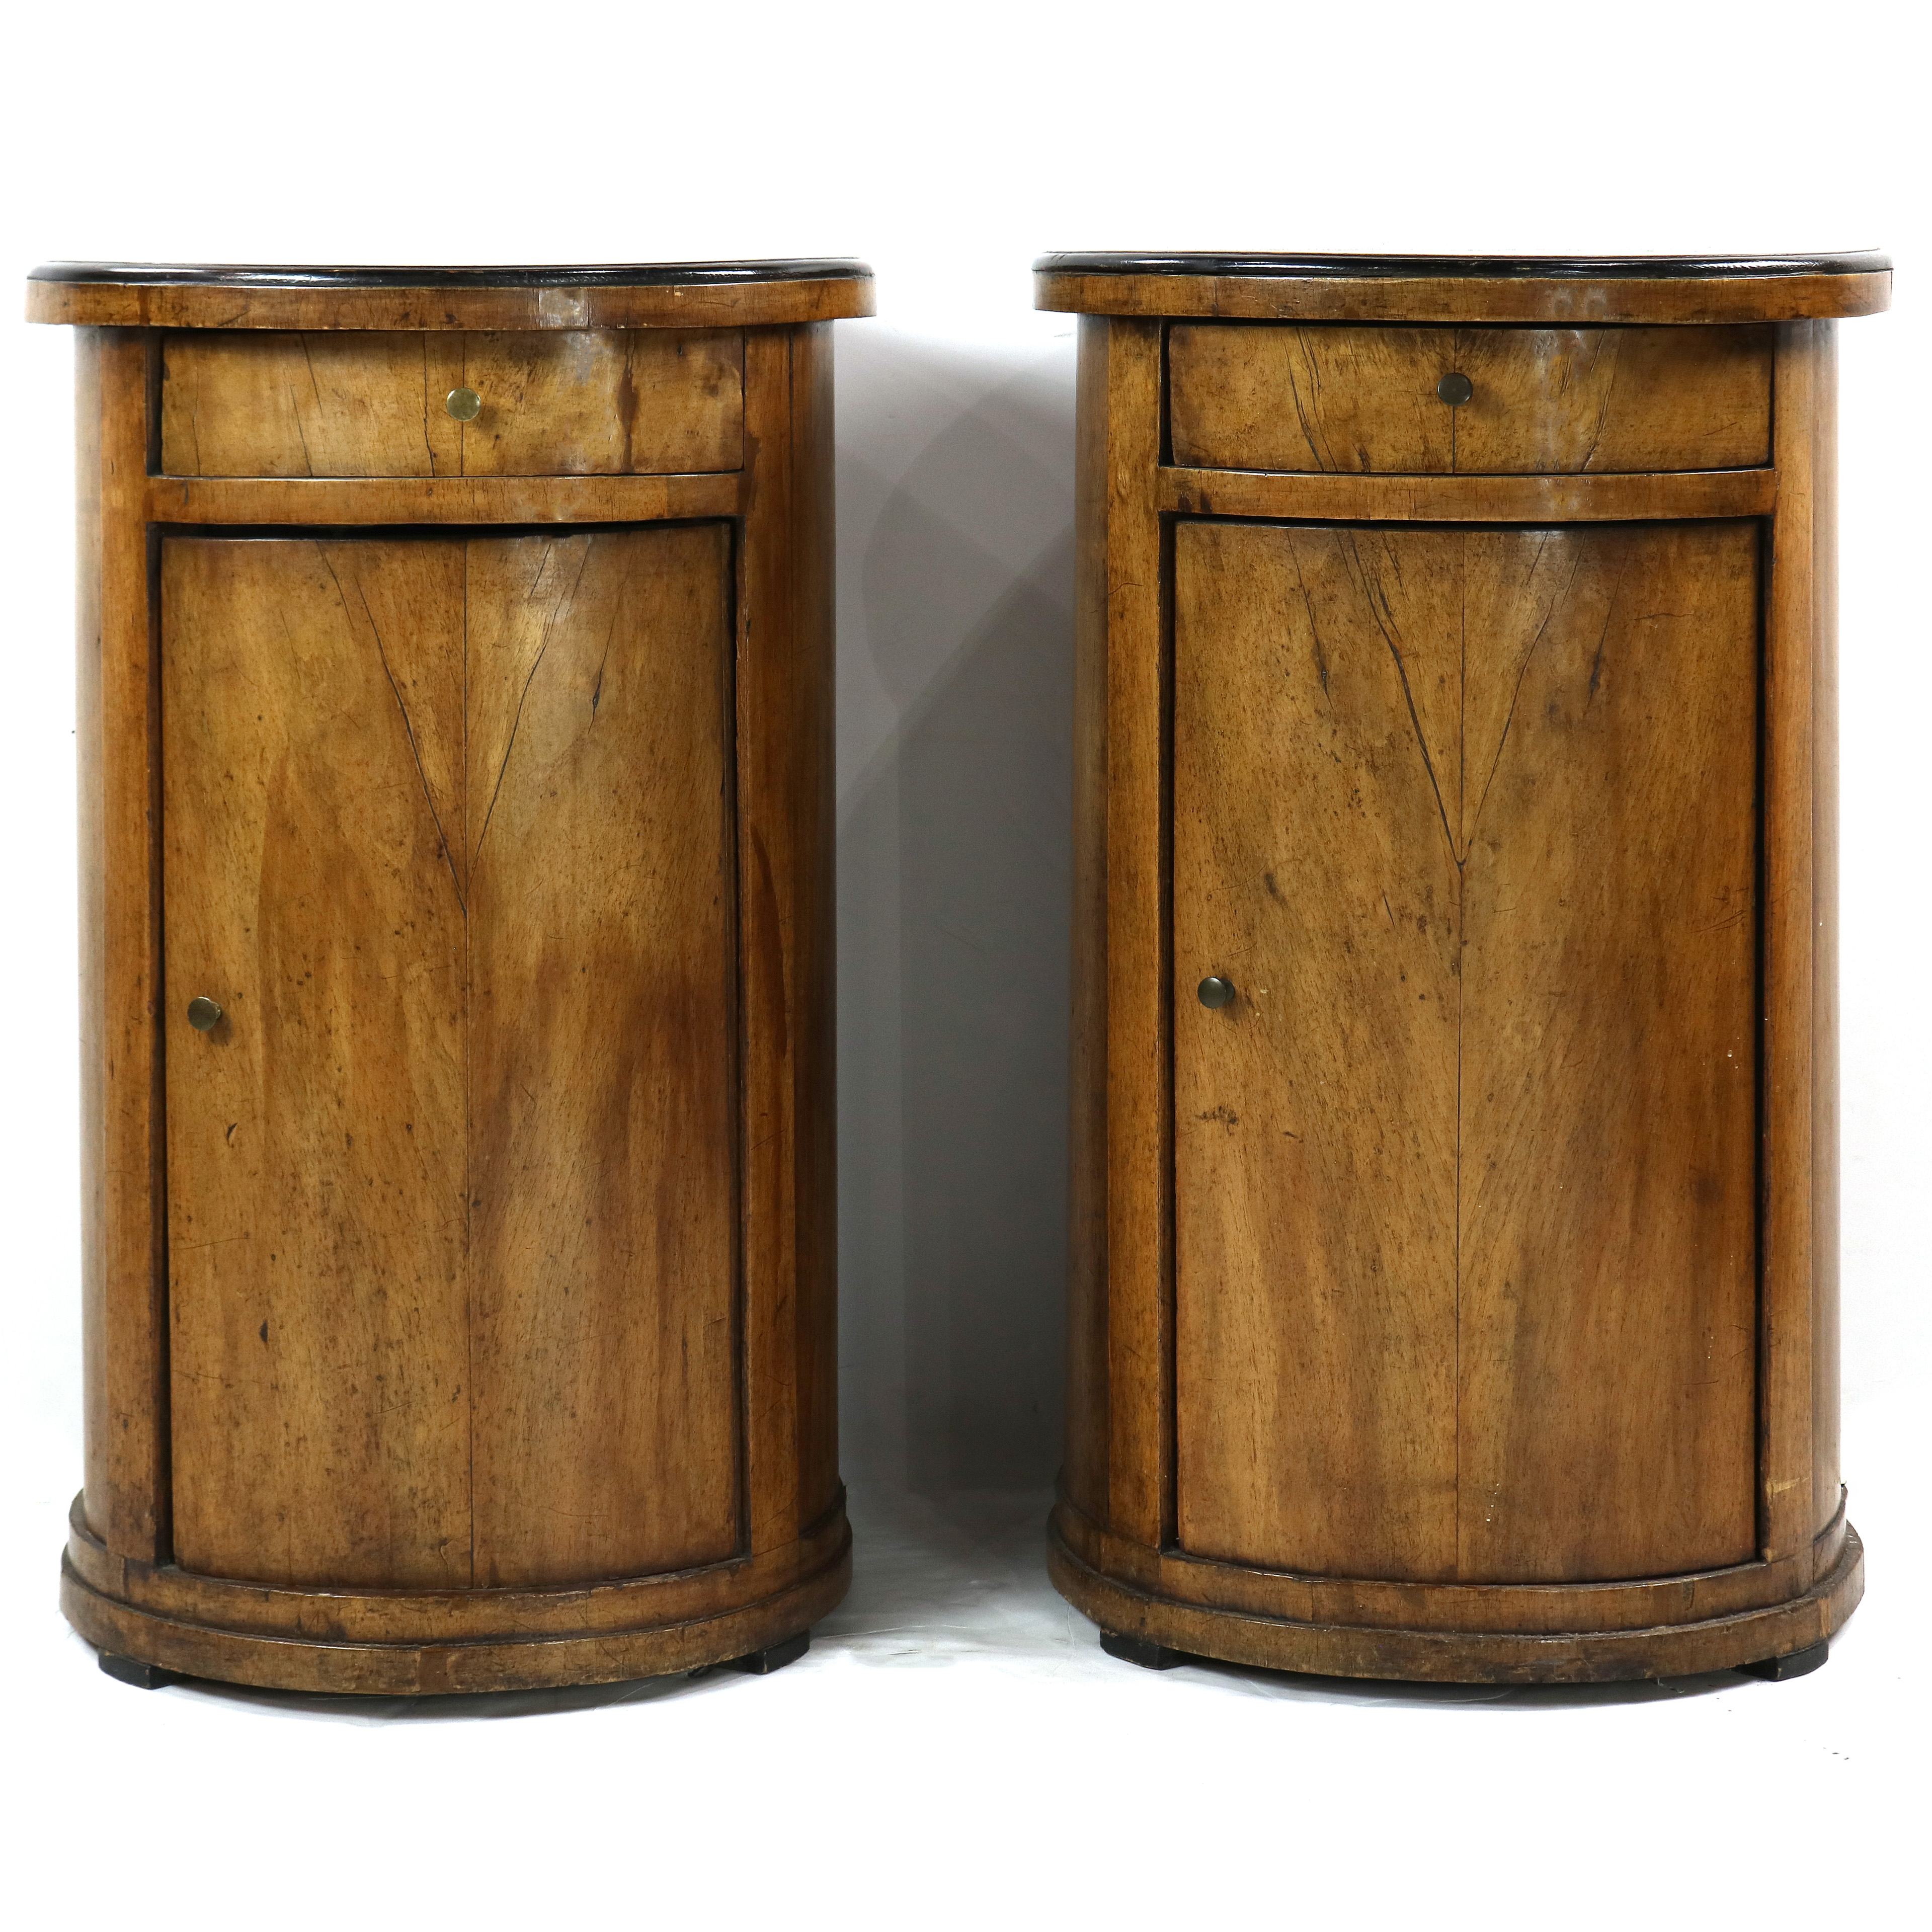 A PAIR OF BIEDERMEIER STYLE OCCASIONAL